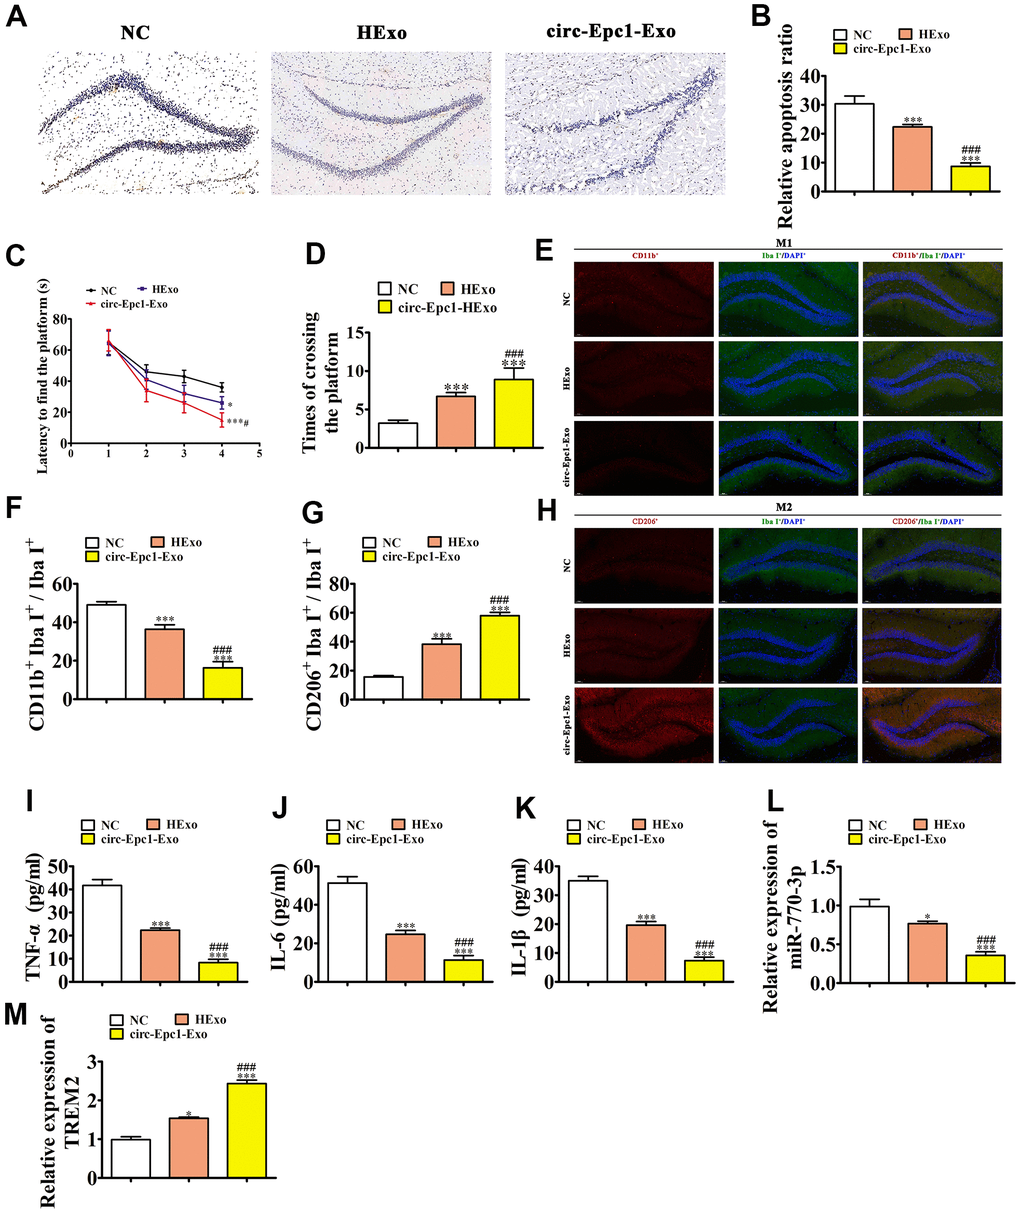 Circ-Epc1-modified ADSC exosomes (circ-Epc1-Exo) showed increased therapeutic effects at improving cognitive function by decreasing neuronal damage and shifting hippocampal microglia from M1 to M2. (A, B) Hippocampal neuron apoptosis was detected using the TUNEL assay. Data represent the mean ± SD (n=6). **P ***P #P C) Alzheimer’s disease mice exhibited a longer escape latency than exosome-treated animals. Data represent the mean ± SD (n=10). *P **P #P D) The number of platform crossings was increased in the exosome-treated group. Data represent the mean ± SD (n=10). *P ***P ###P E–H) Immunofluorescence detection of macrophage polarization using F4/80+, CD11b+, and CD206+staining. Data are presented as the mean ± SEM. ***P ###P I–K) ELISA results showing expressions of the inflammatory factors, TNF-α, IL-6, and IL-1β. Data are presented as the mean ± SEM. ***P ###P L, M) RT-qPCR showing the expressions of miR-770-3p and TREM2 in hippocampal tissues. Data are presented as the mean ± SEM. ***P ###P 